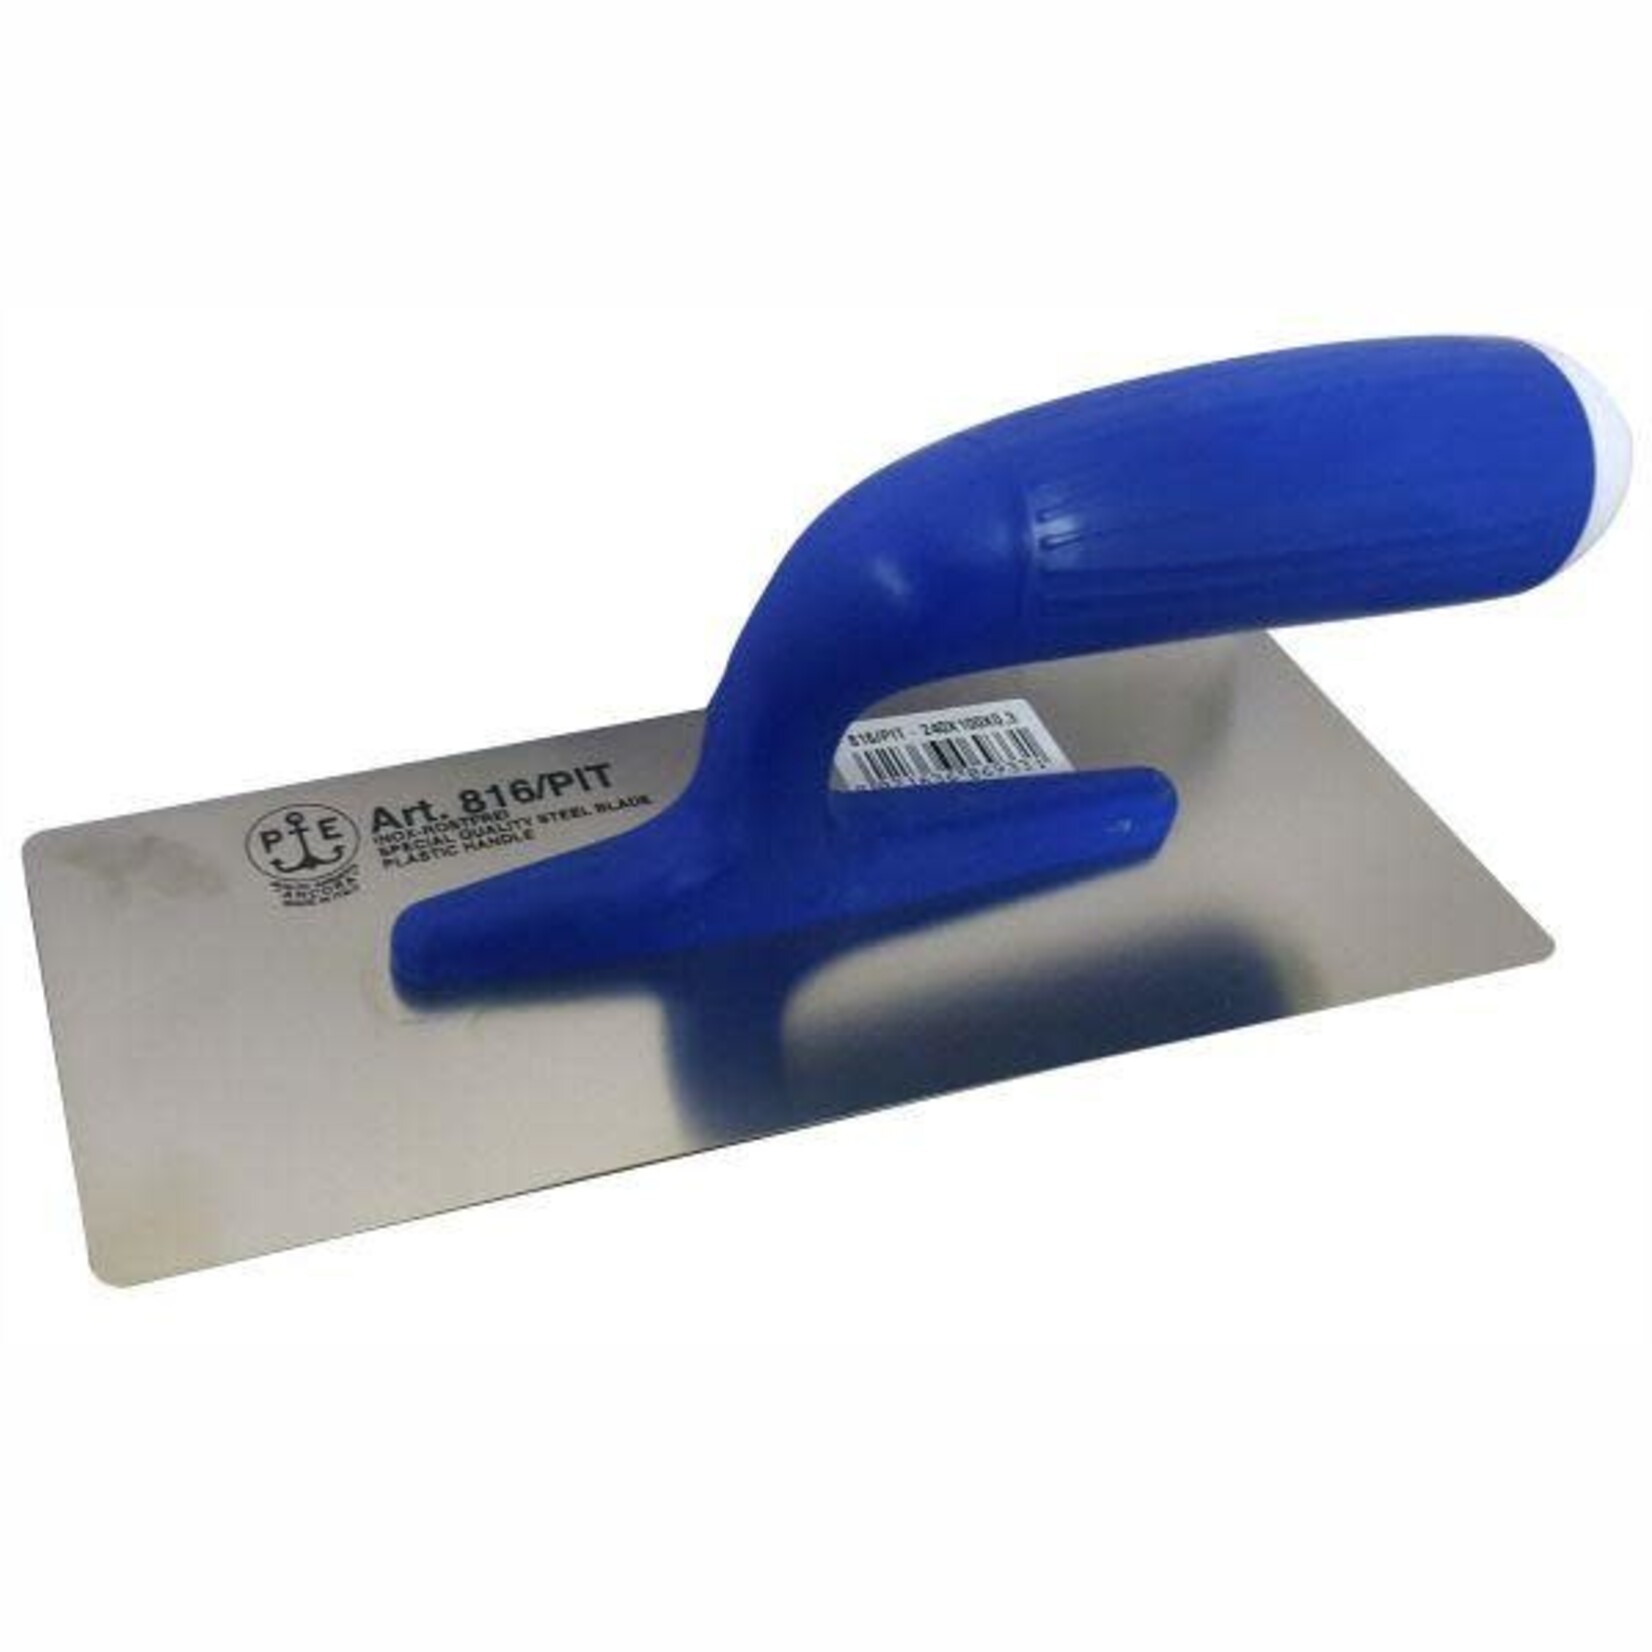 Ancora Ancora Pavan 816/PIT  Stainless Flexible Trapezoidal Trowel -  Rounded Corner